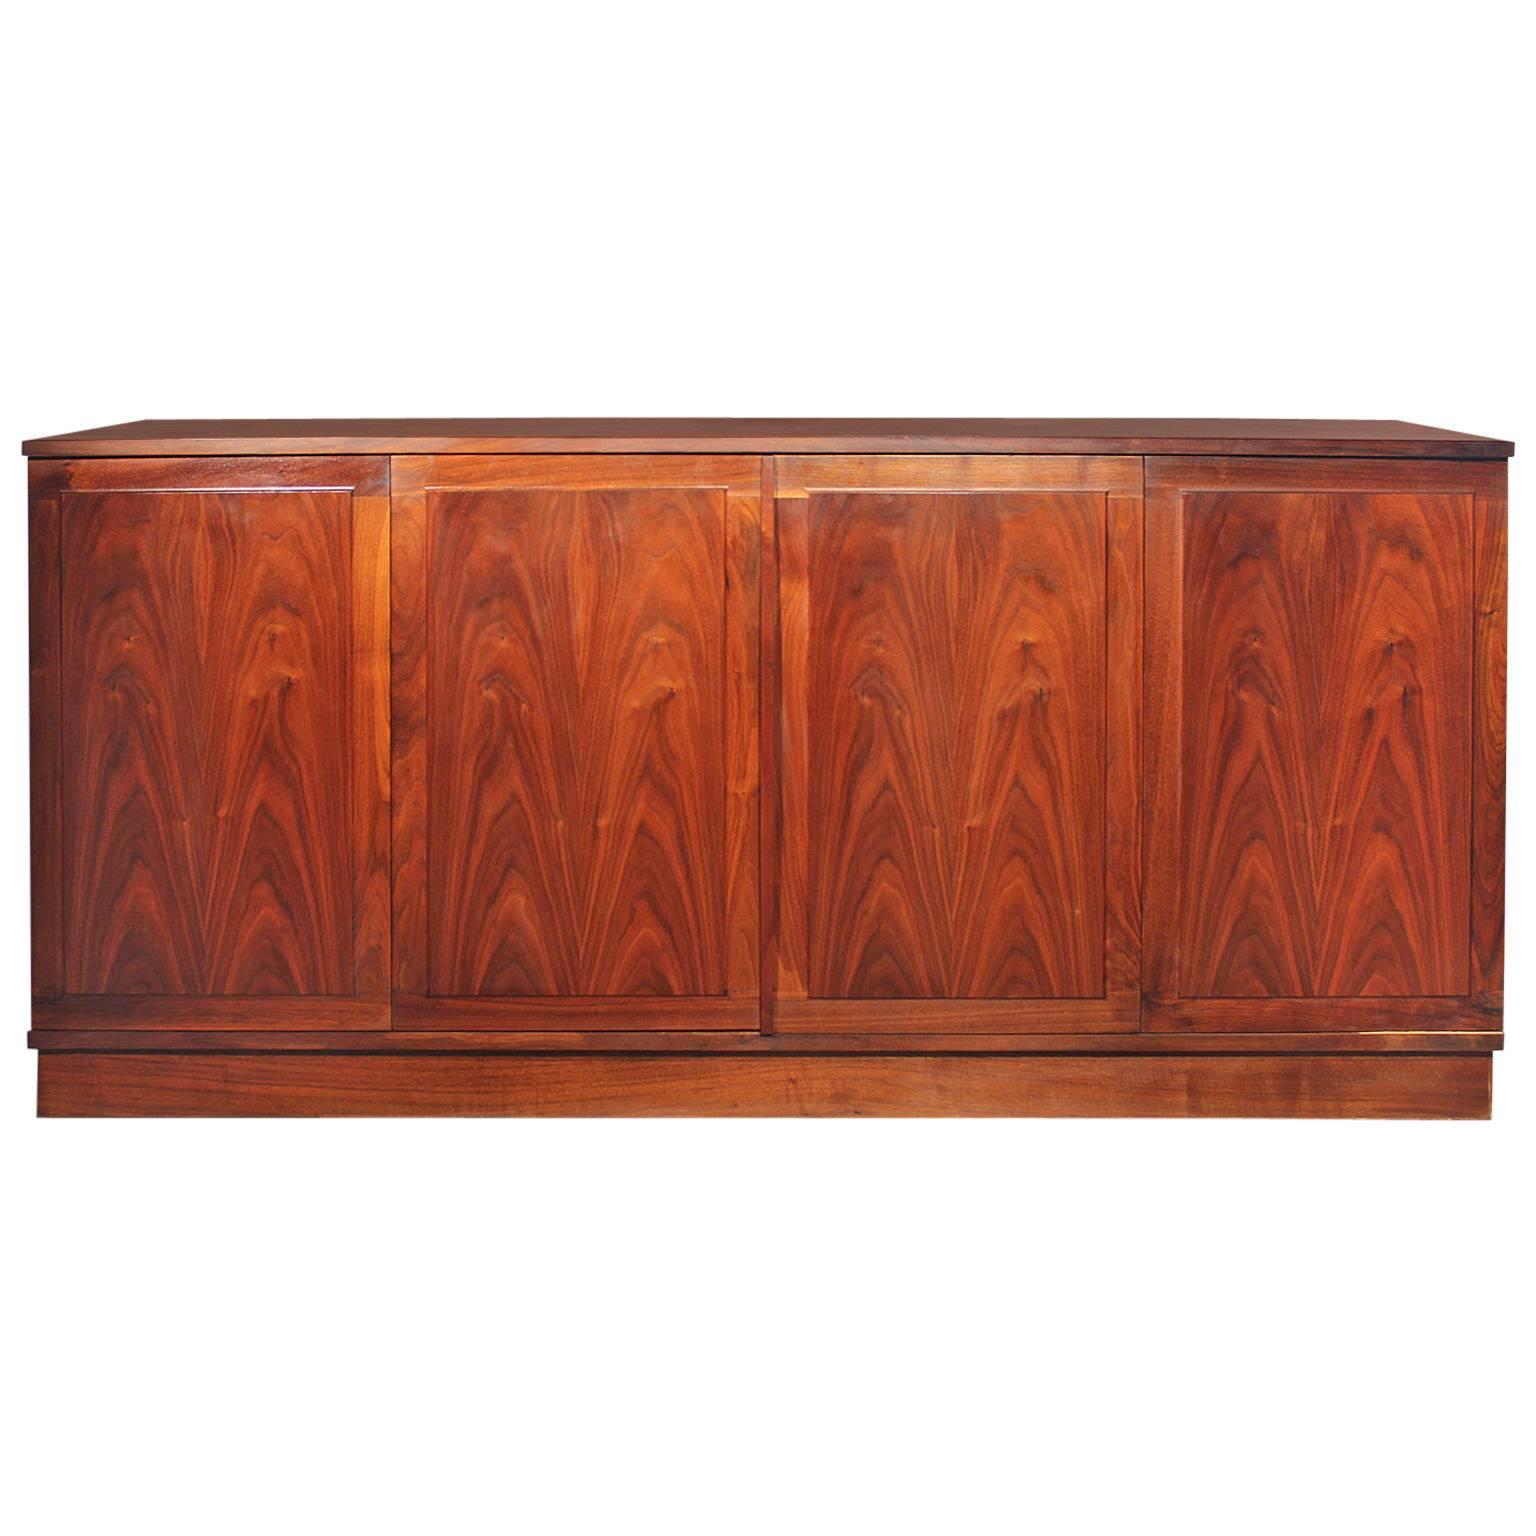 Honduran Rosewood Bookmatched Cabinet by Jack Cartwright for Founders Furniture